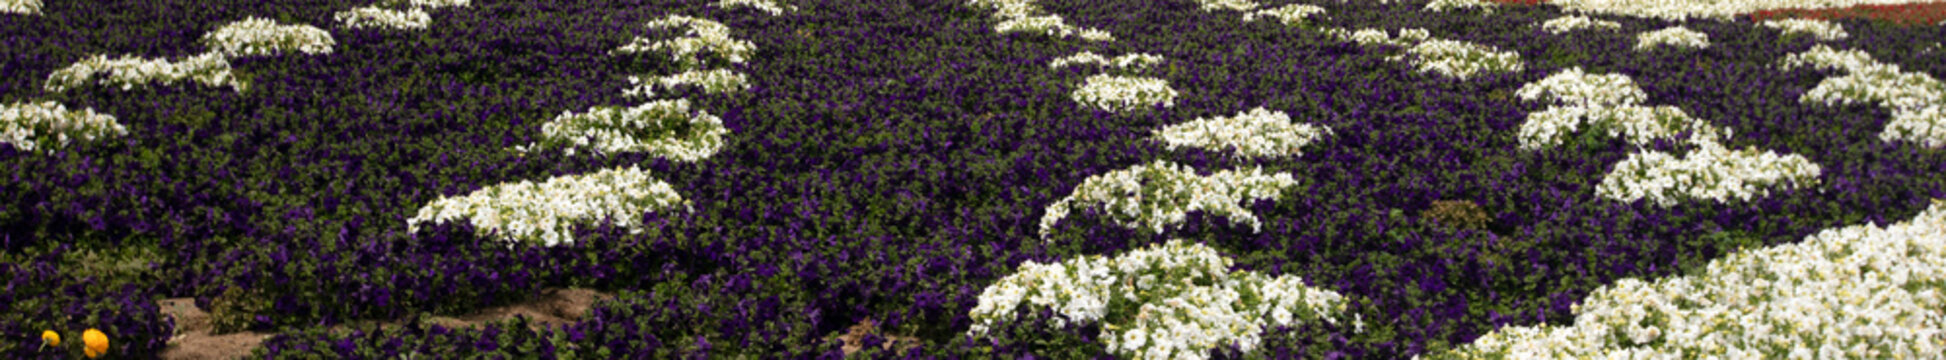 Purple and white ranunculus flowers in southern California United States